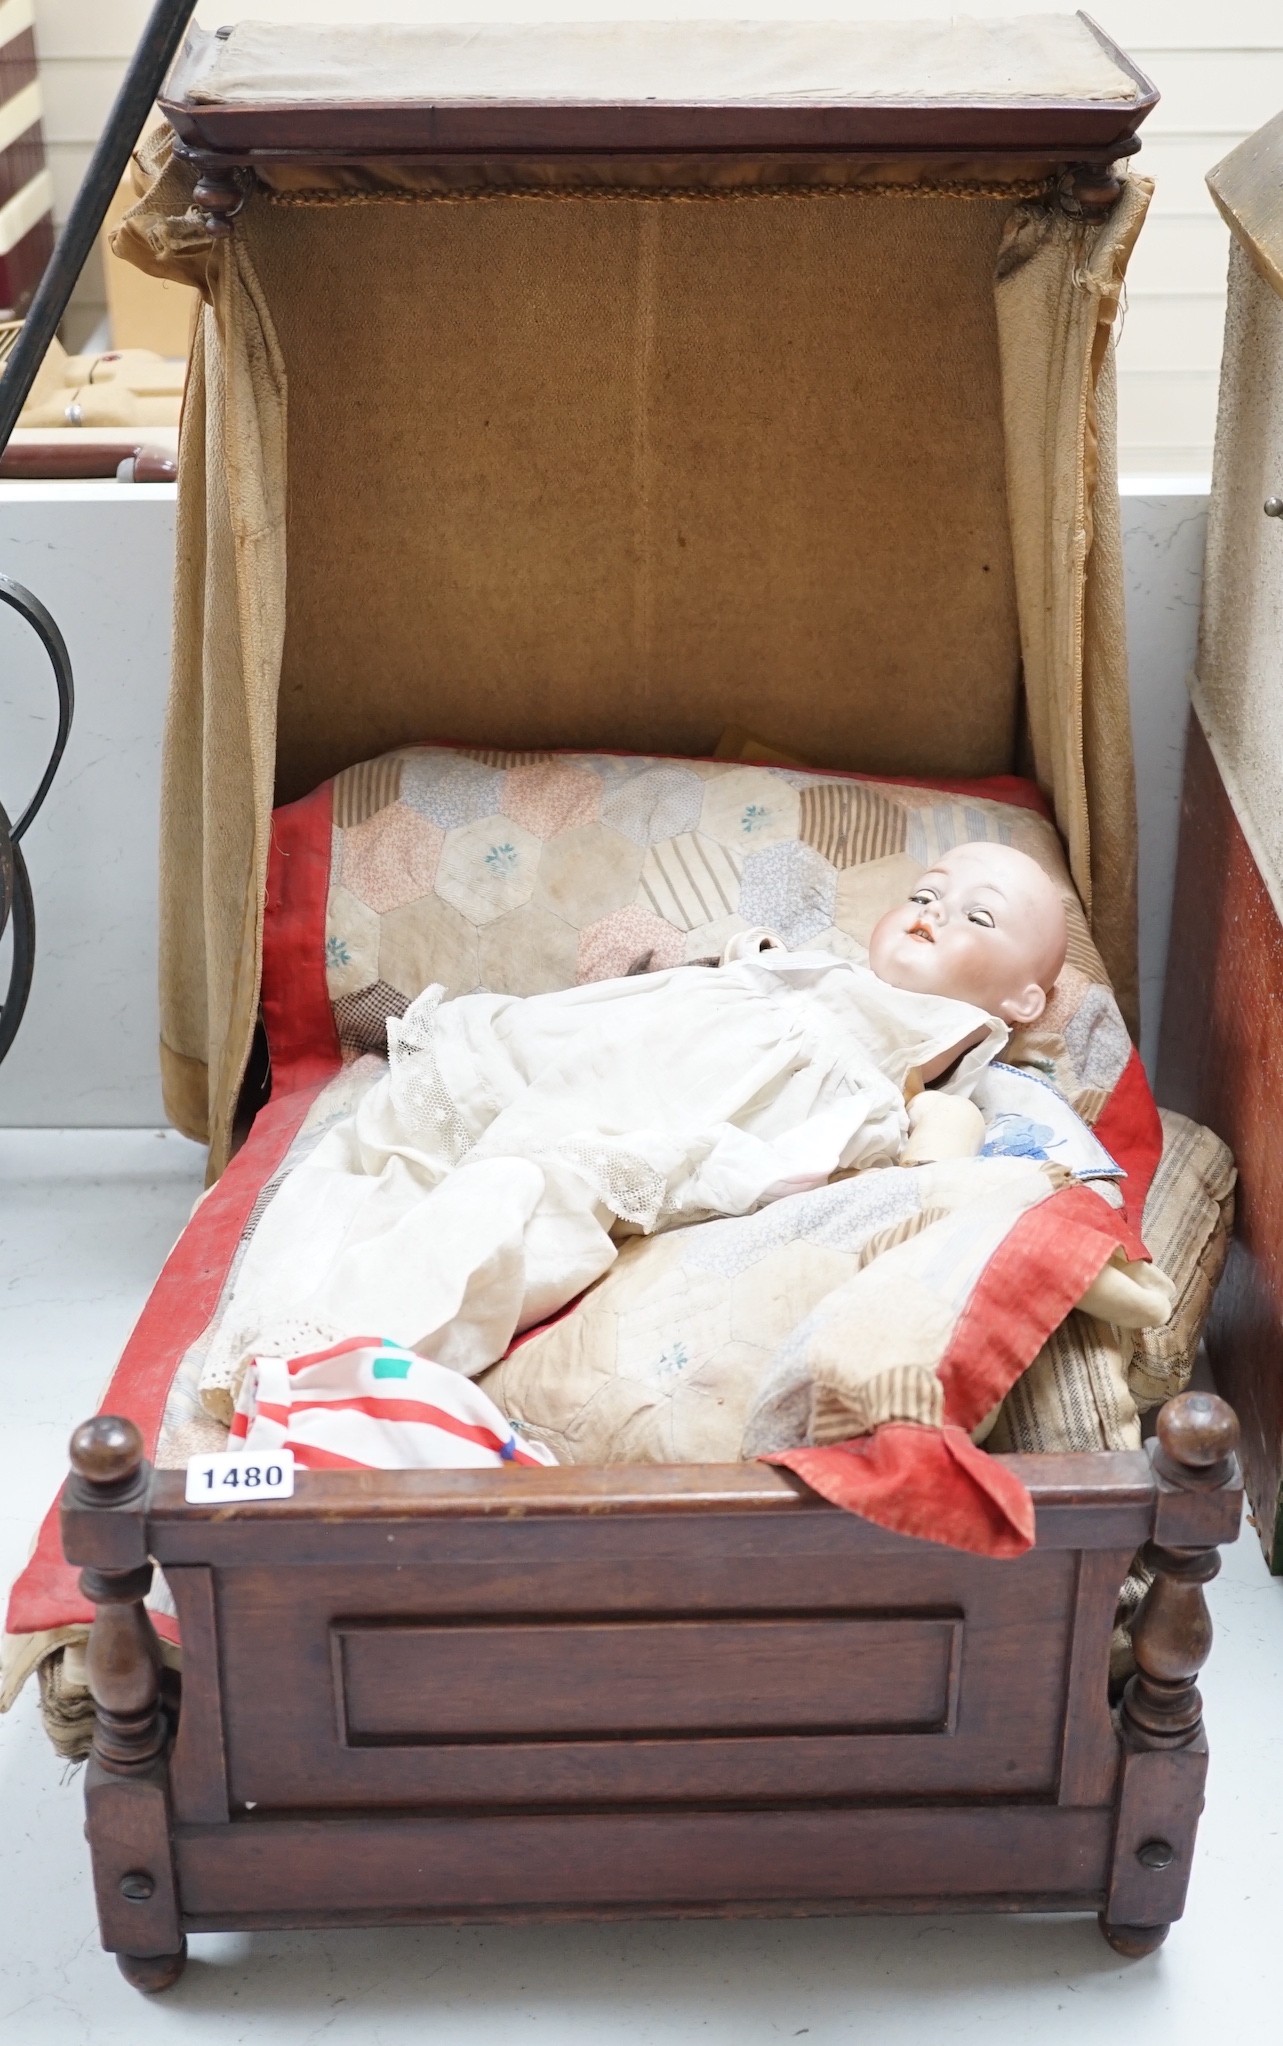 An Armand Marseille 390 A 11/2 M porcelain doll and a half tester wooded bed, bed 55cms deep x 55cms high x 36cms wide                                                                                                      